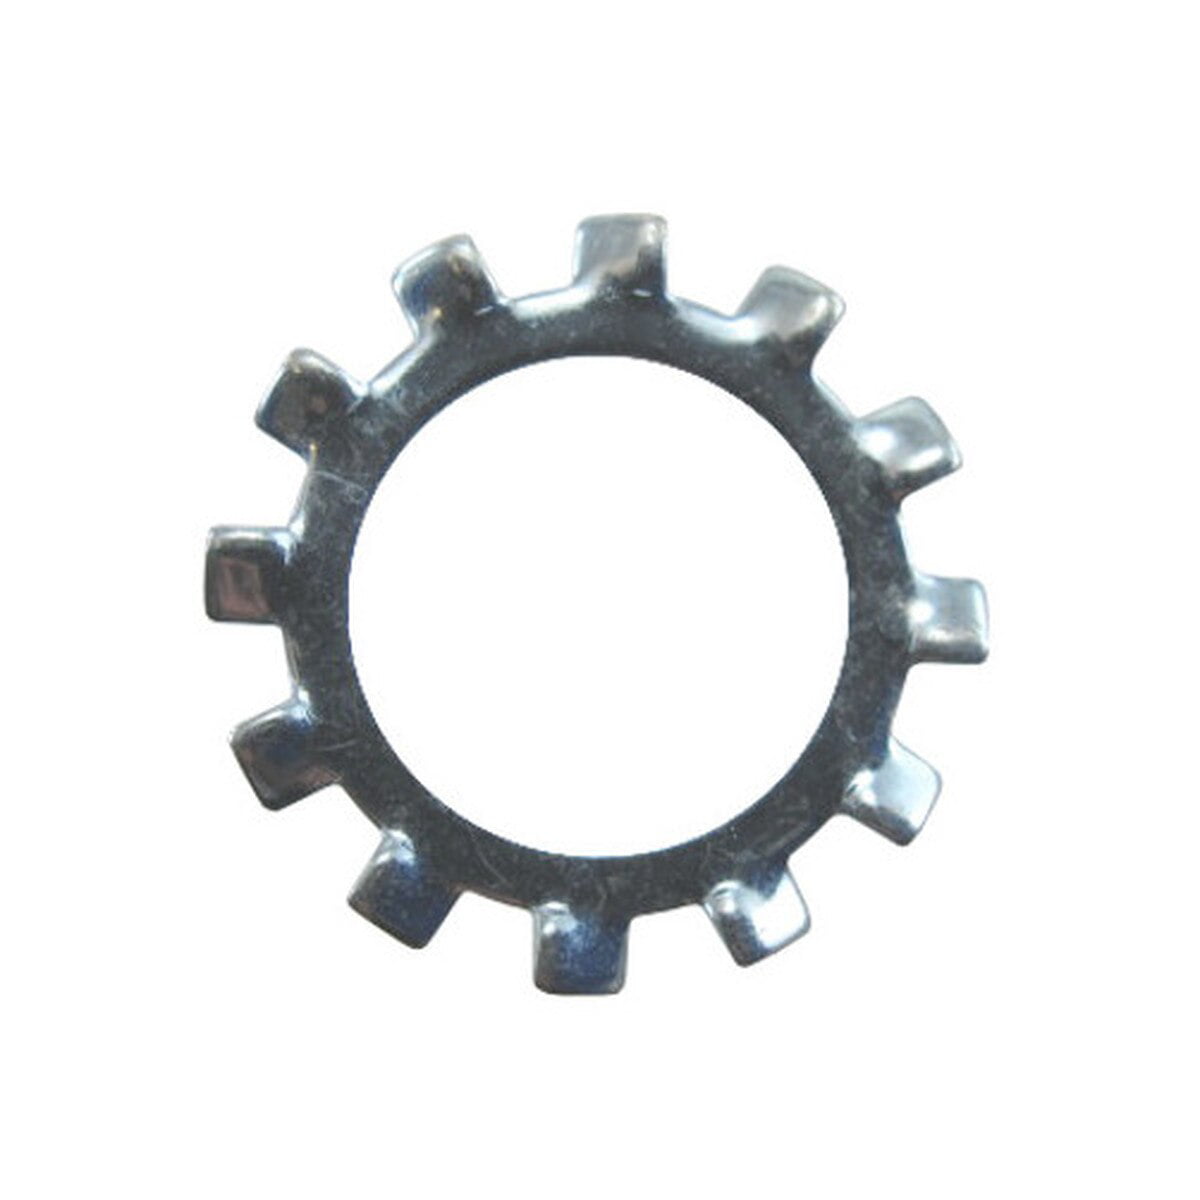 100 1/4 External Tooth Lock Washers Steel Zinc Plated 